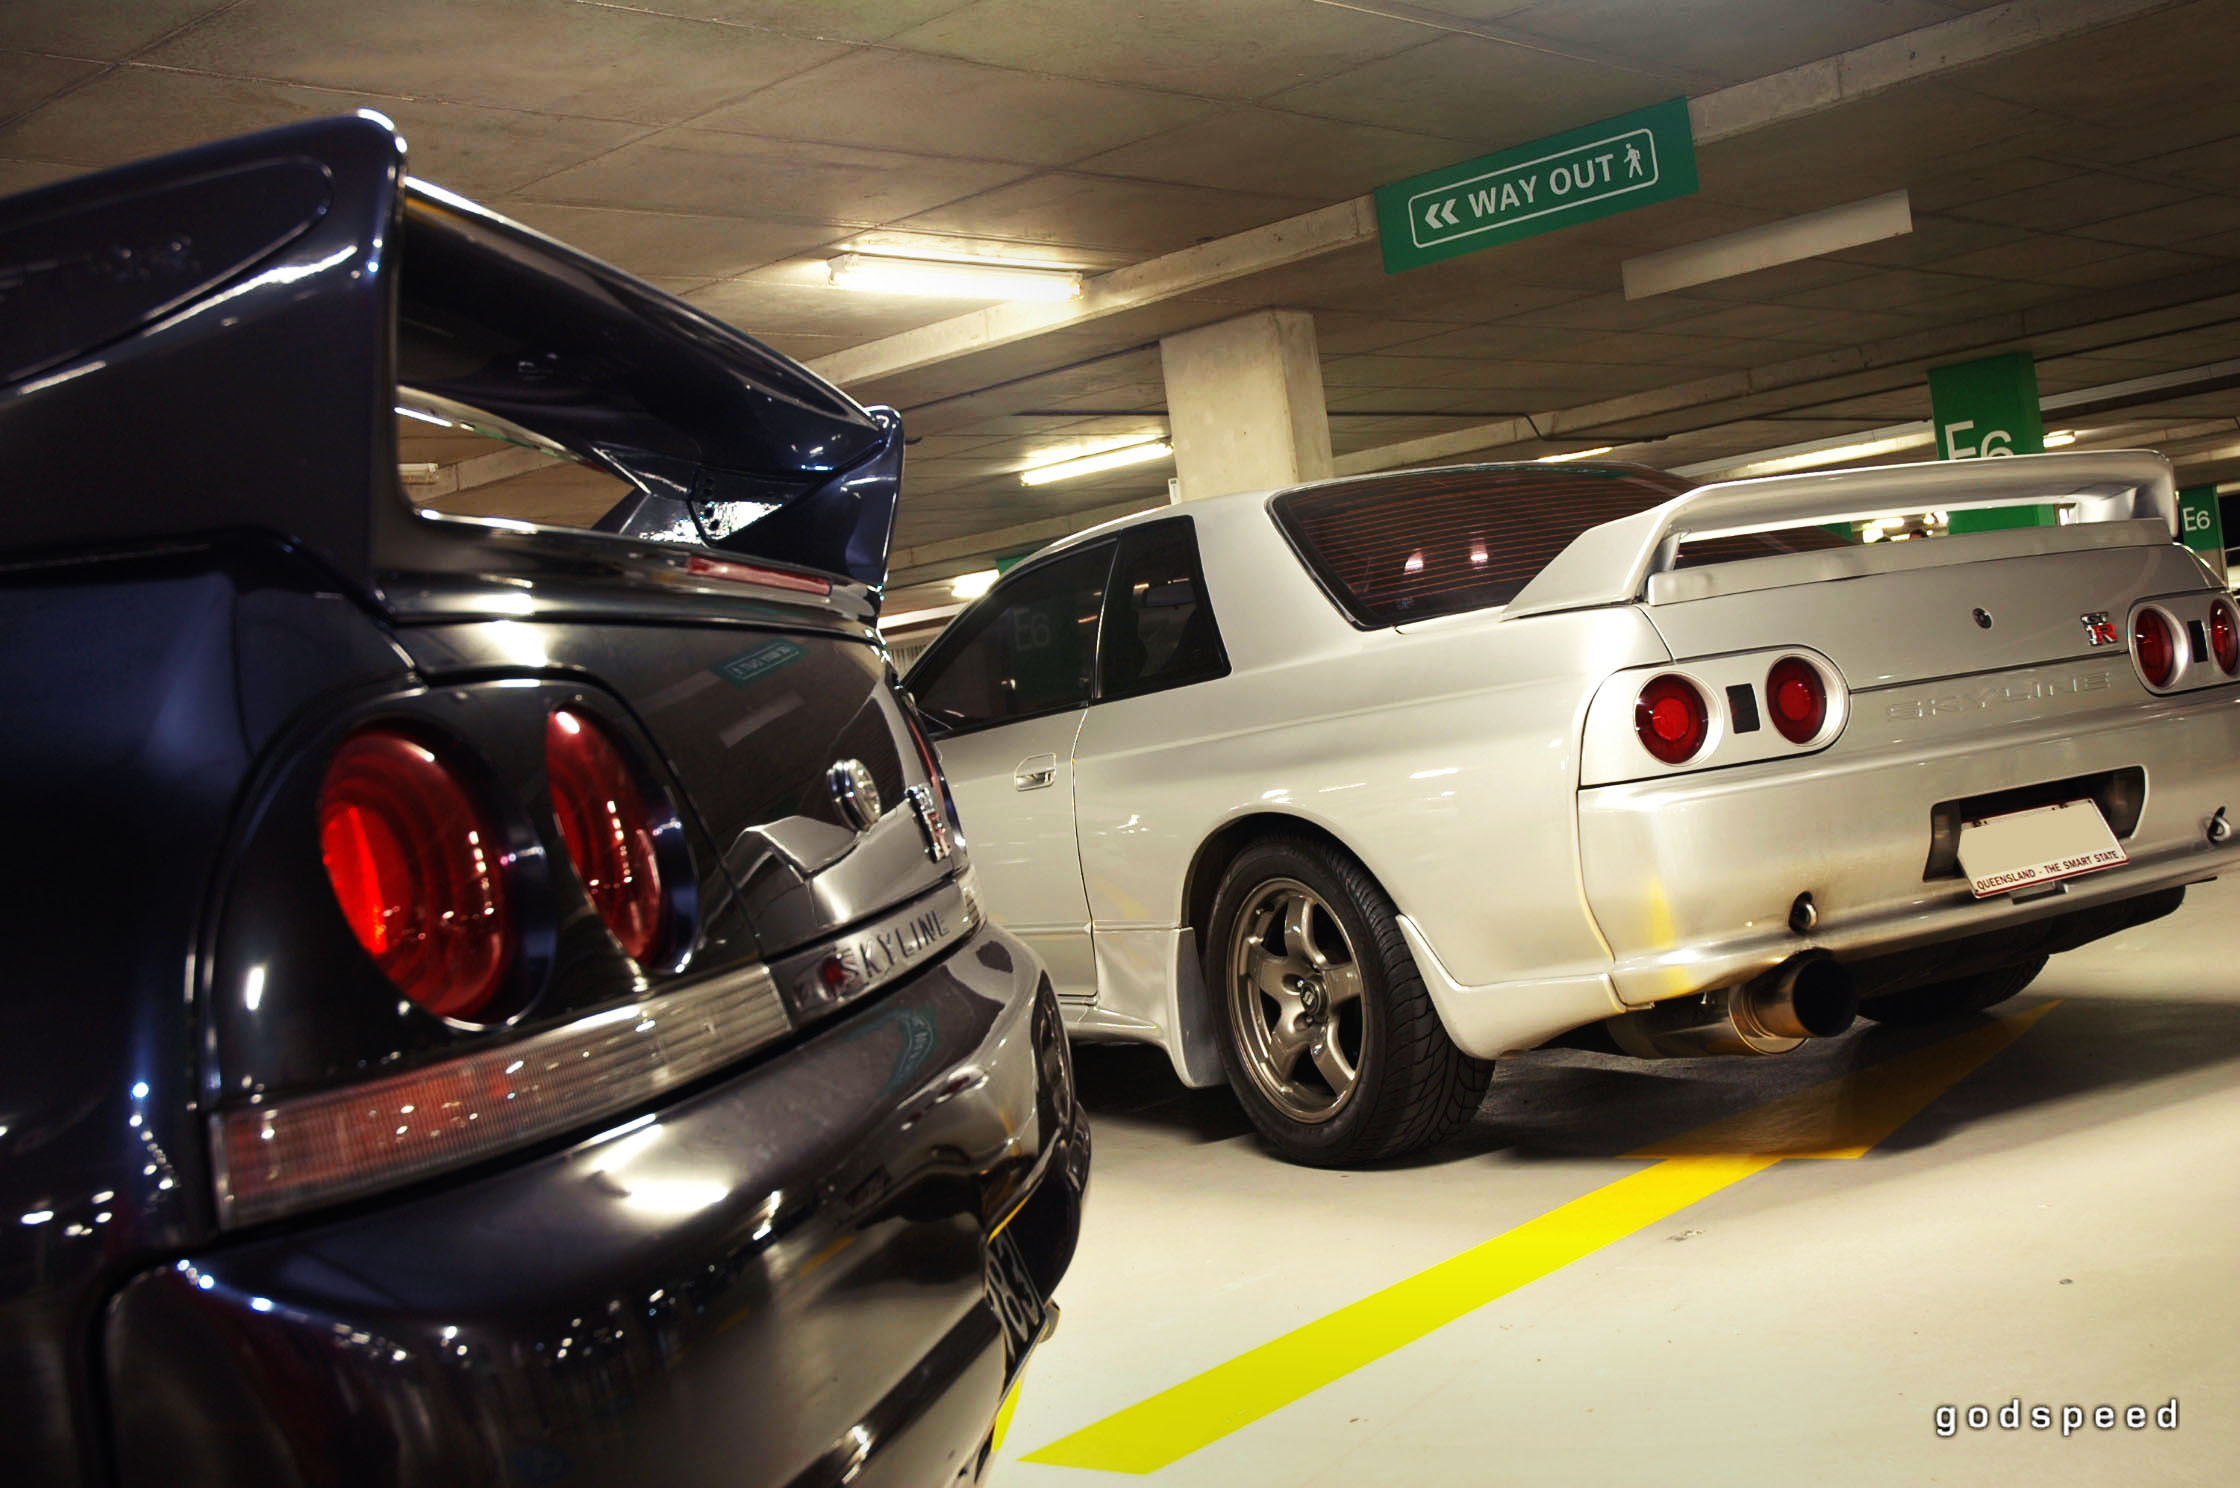 Nissan Skyline R32 and R33 GT-R (Re-Edit) | Flickr - Photo Sharing!